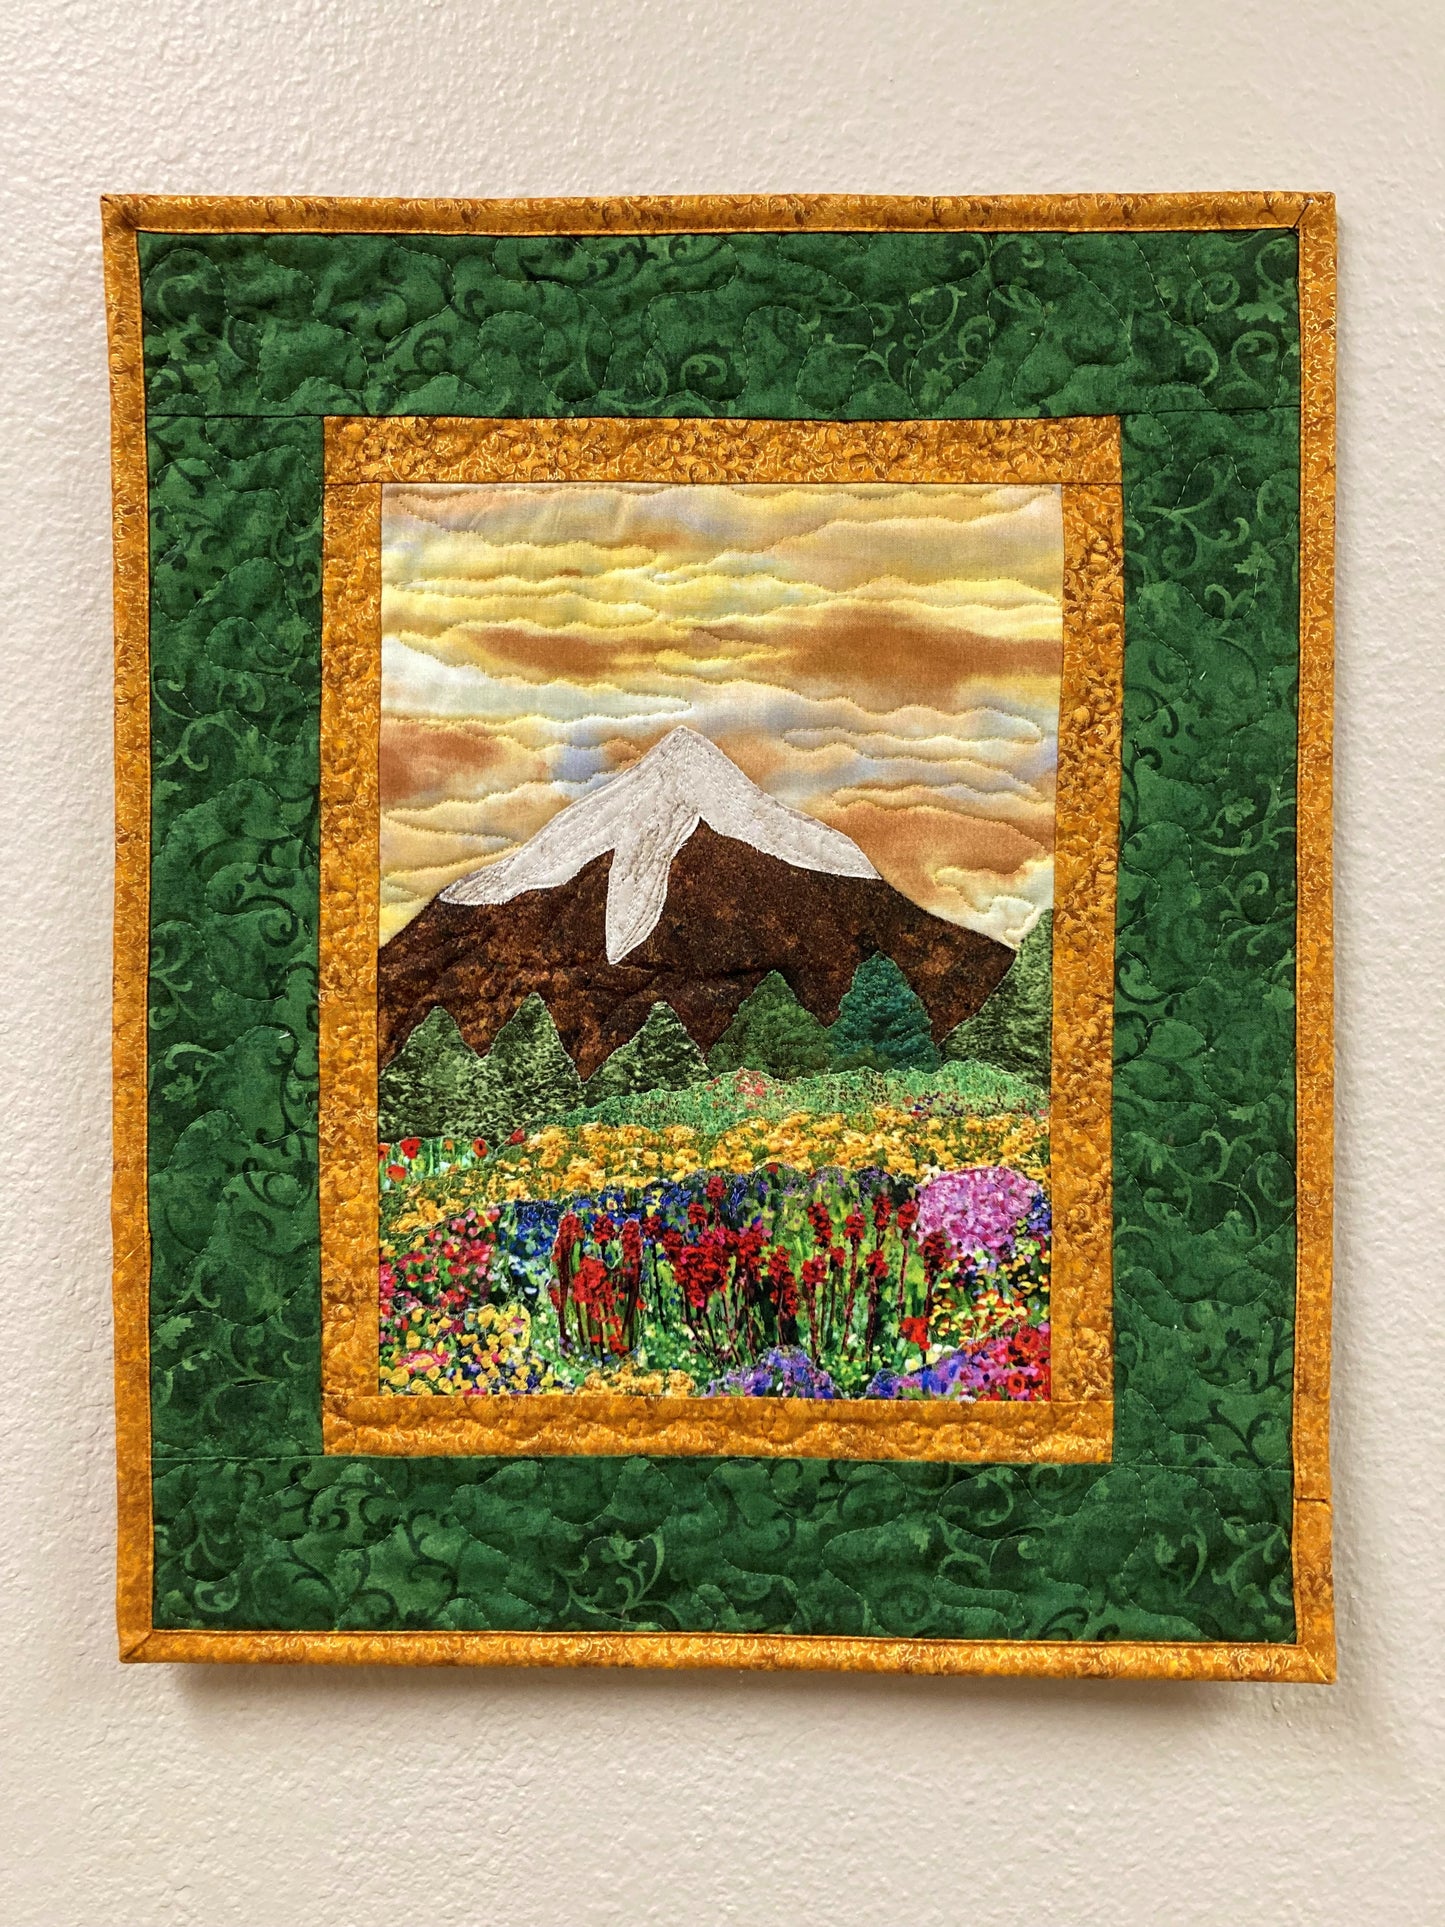 Sunset Wildflower Poppy Meadow Mountain Landscape Art Quilt, Textile 18x14", Tapestry Fabric Small Wall Art Hanging, Red Pink Yellow Flowers